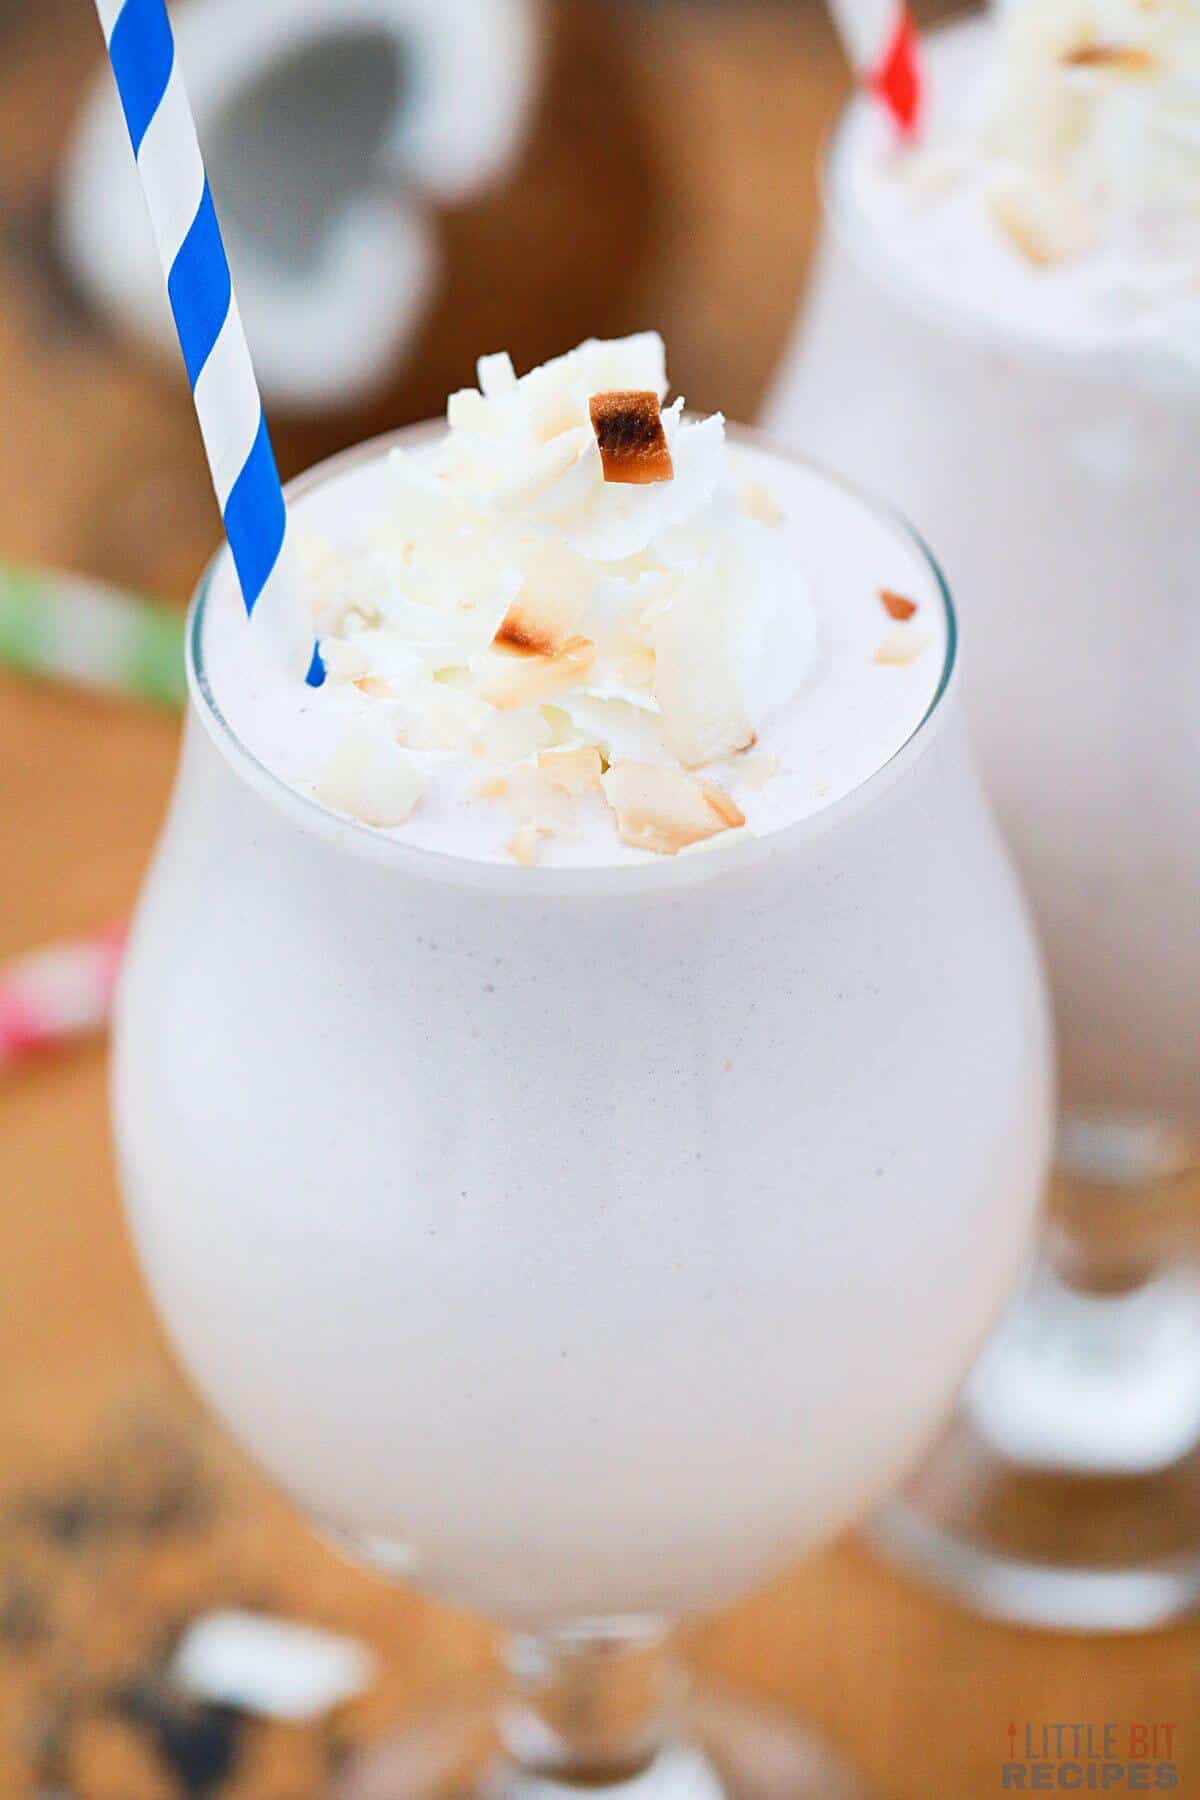 coconut shake with blue striped straw.